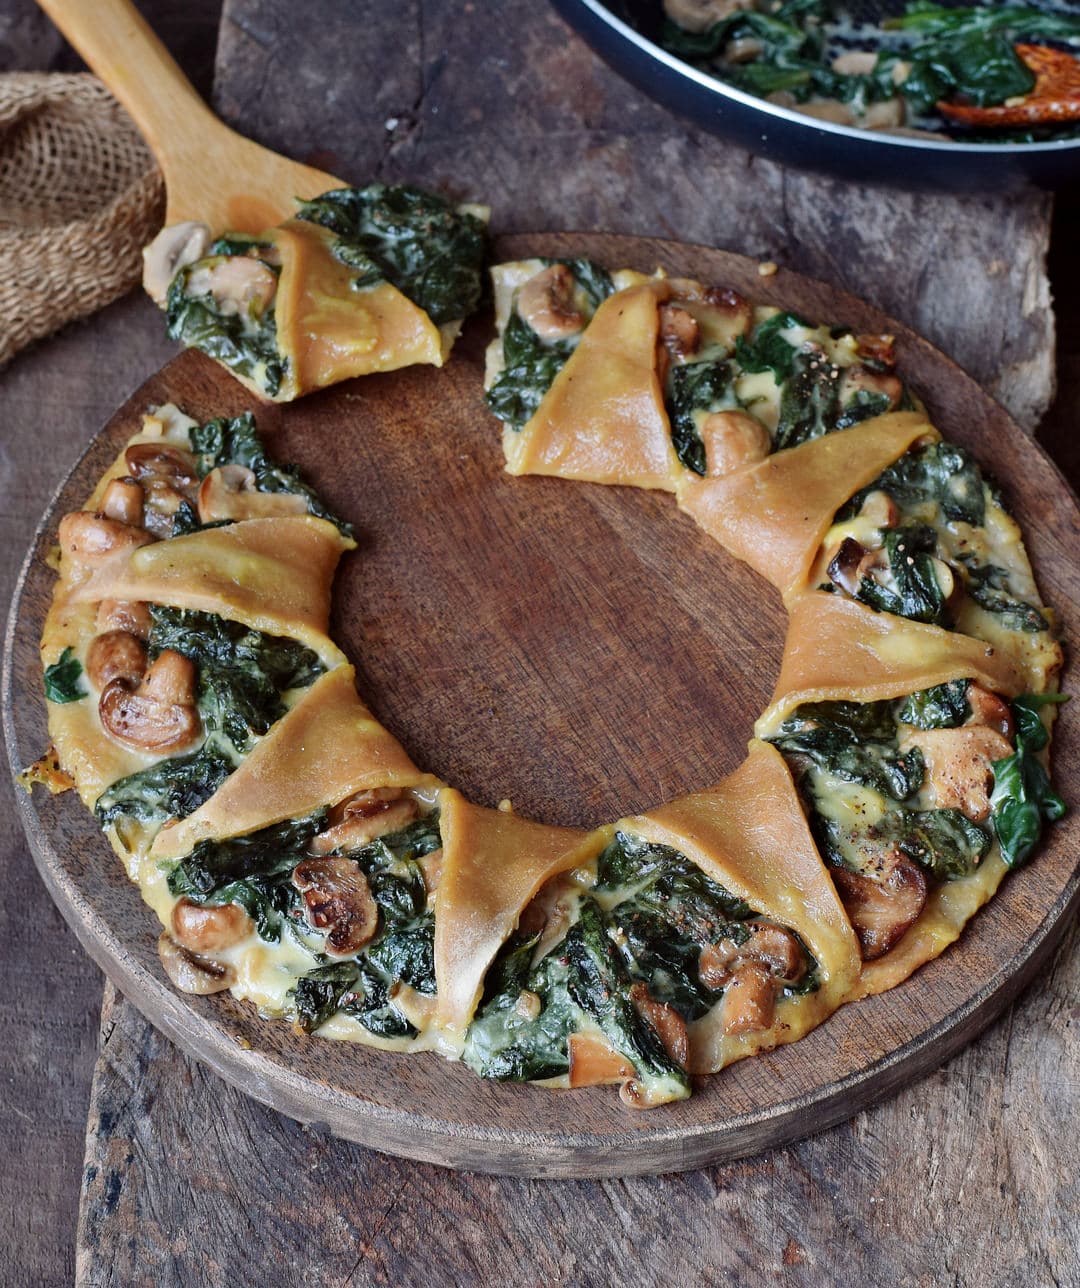 Gluten-free dough with spinach mushrooms and vegan cheese